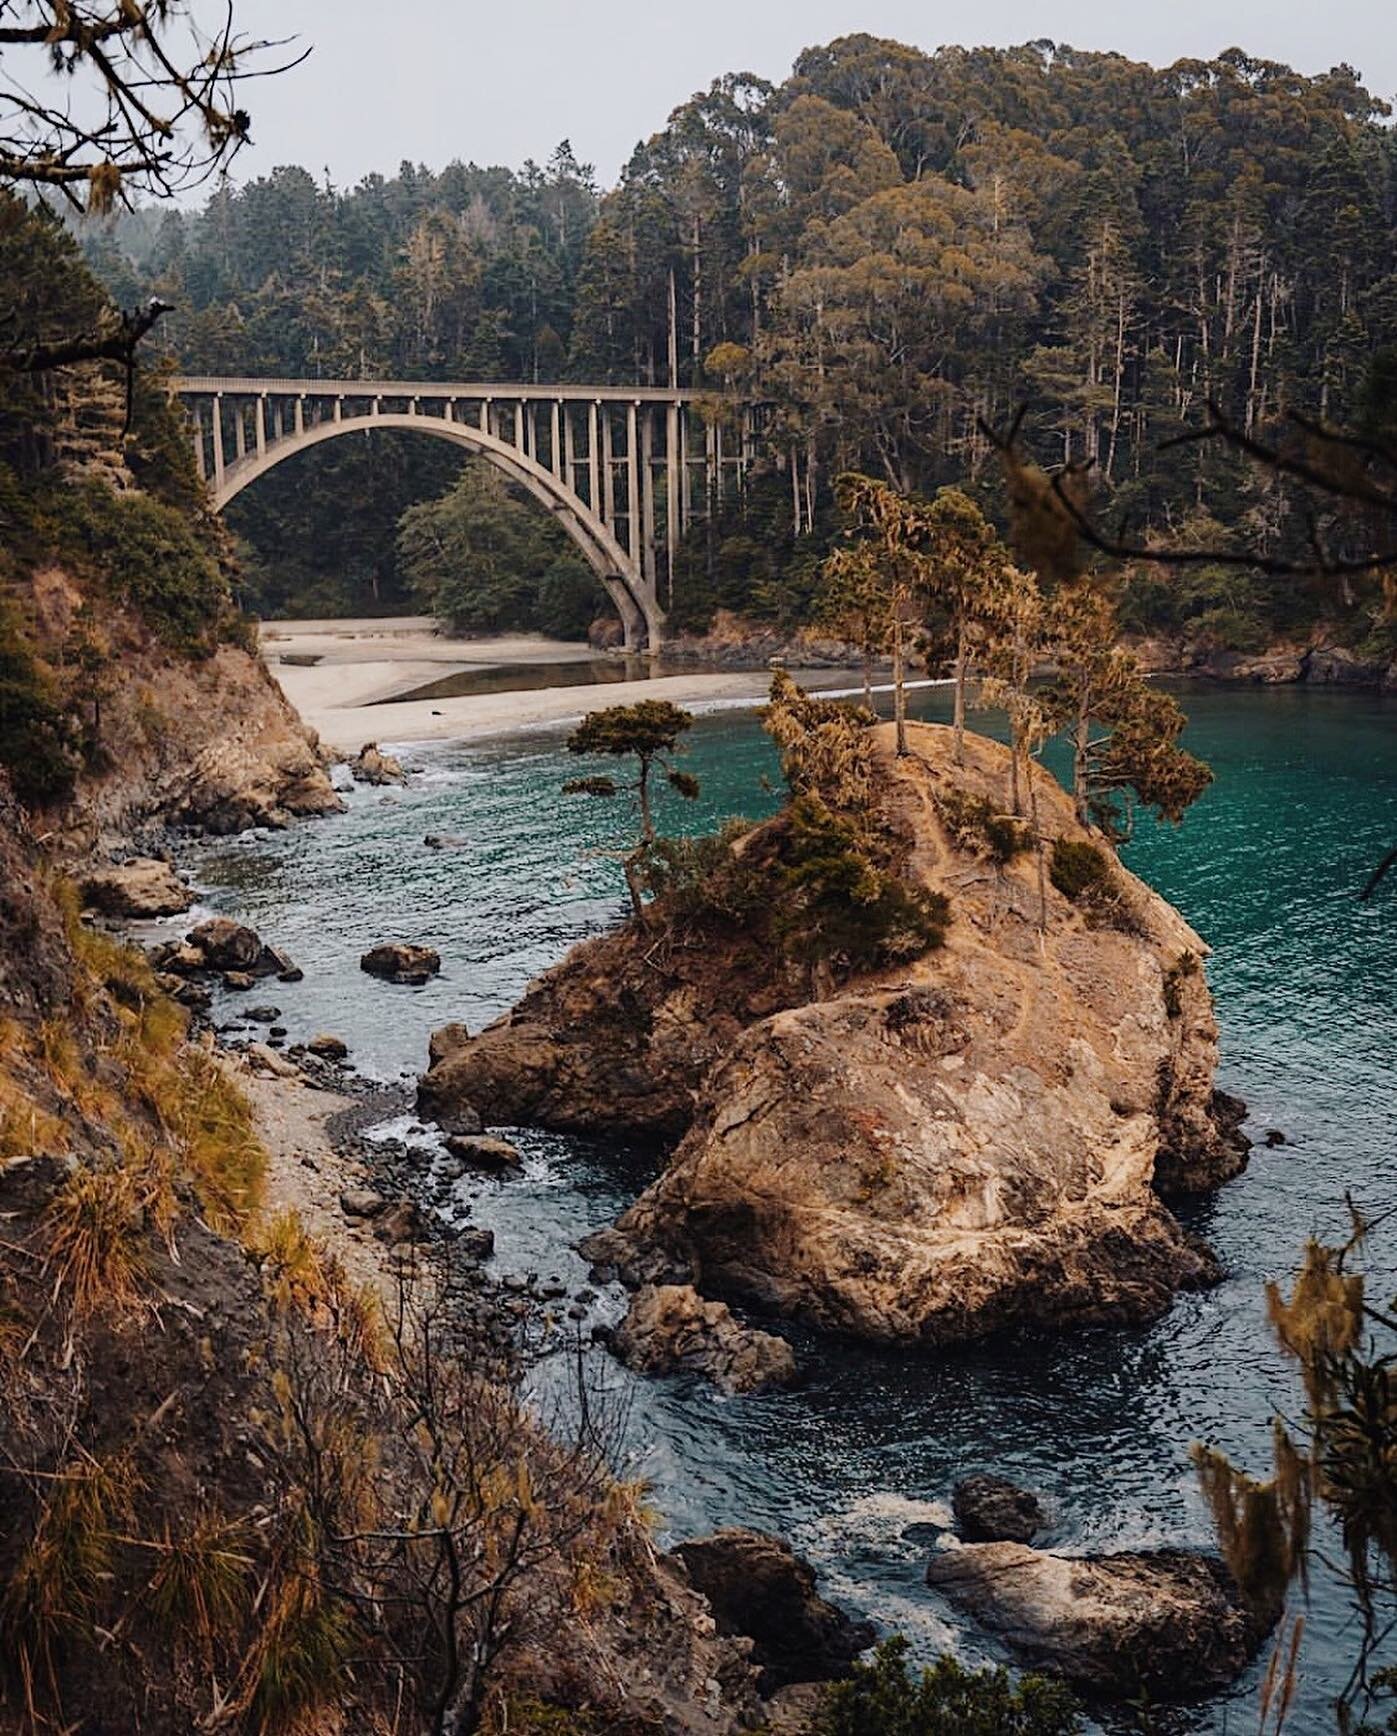 Russian Gulch State Park - A beautiful spot to hike and explore.

Photo by @californiathroughmylens